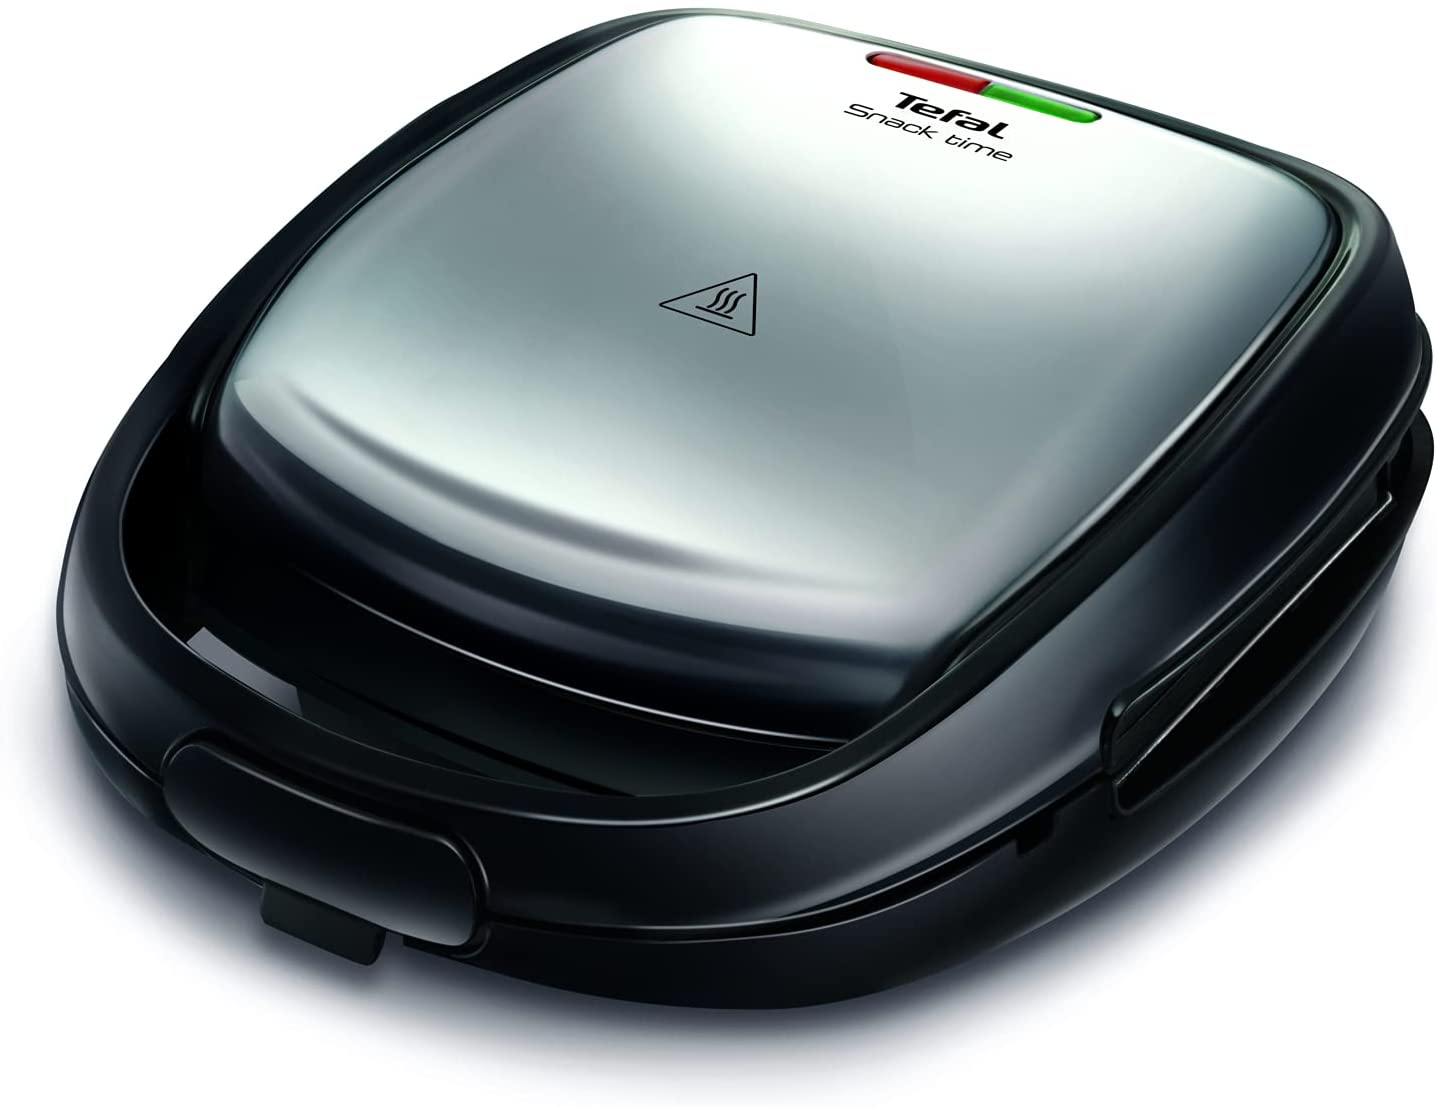 Tefal SW341D12 700W Black,Stainless steel Toaster